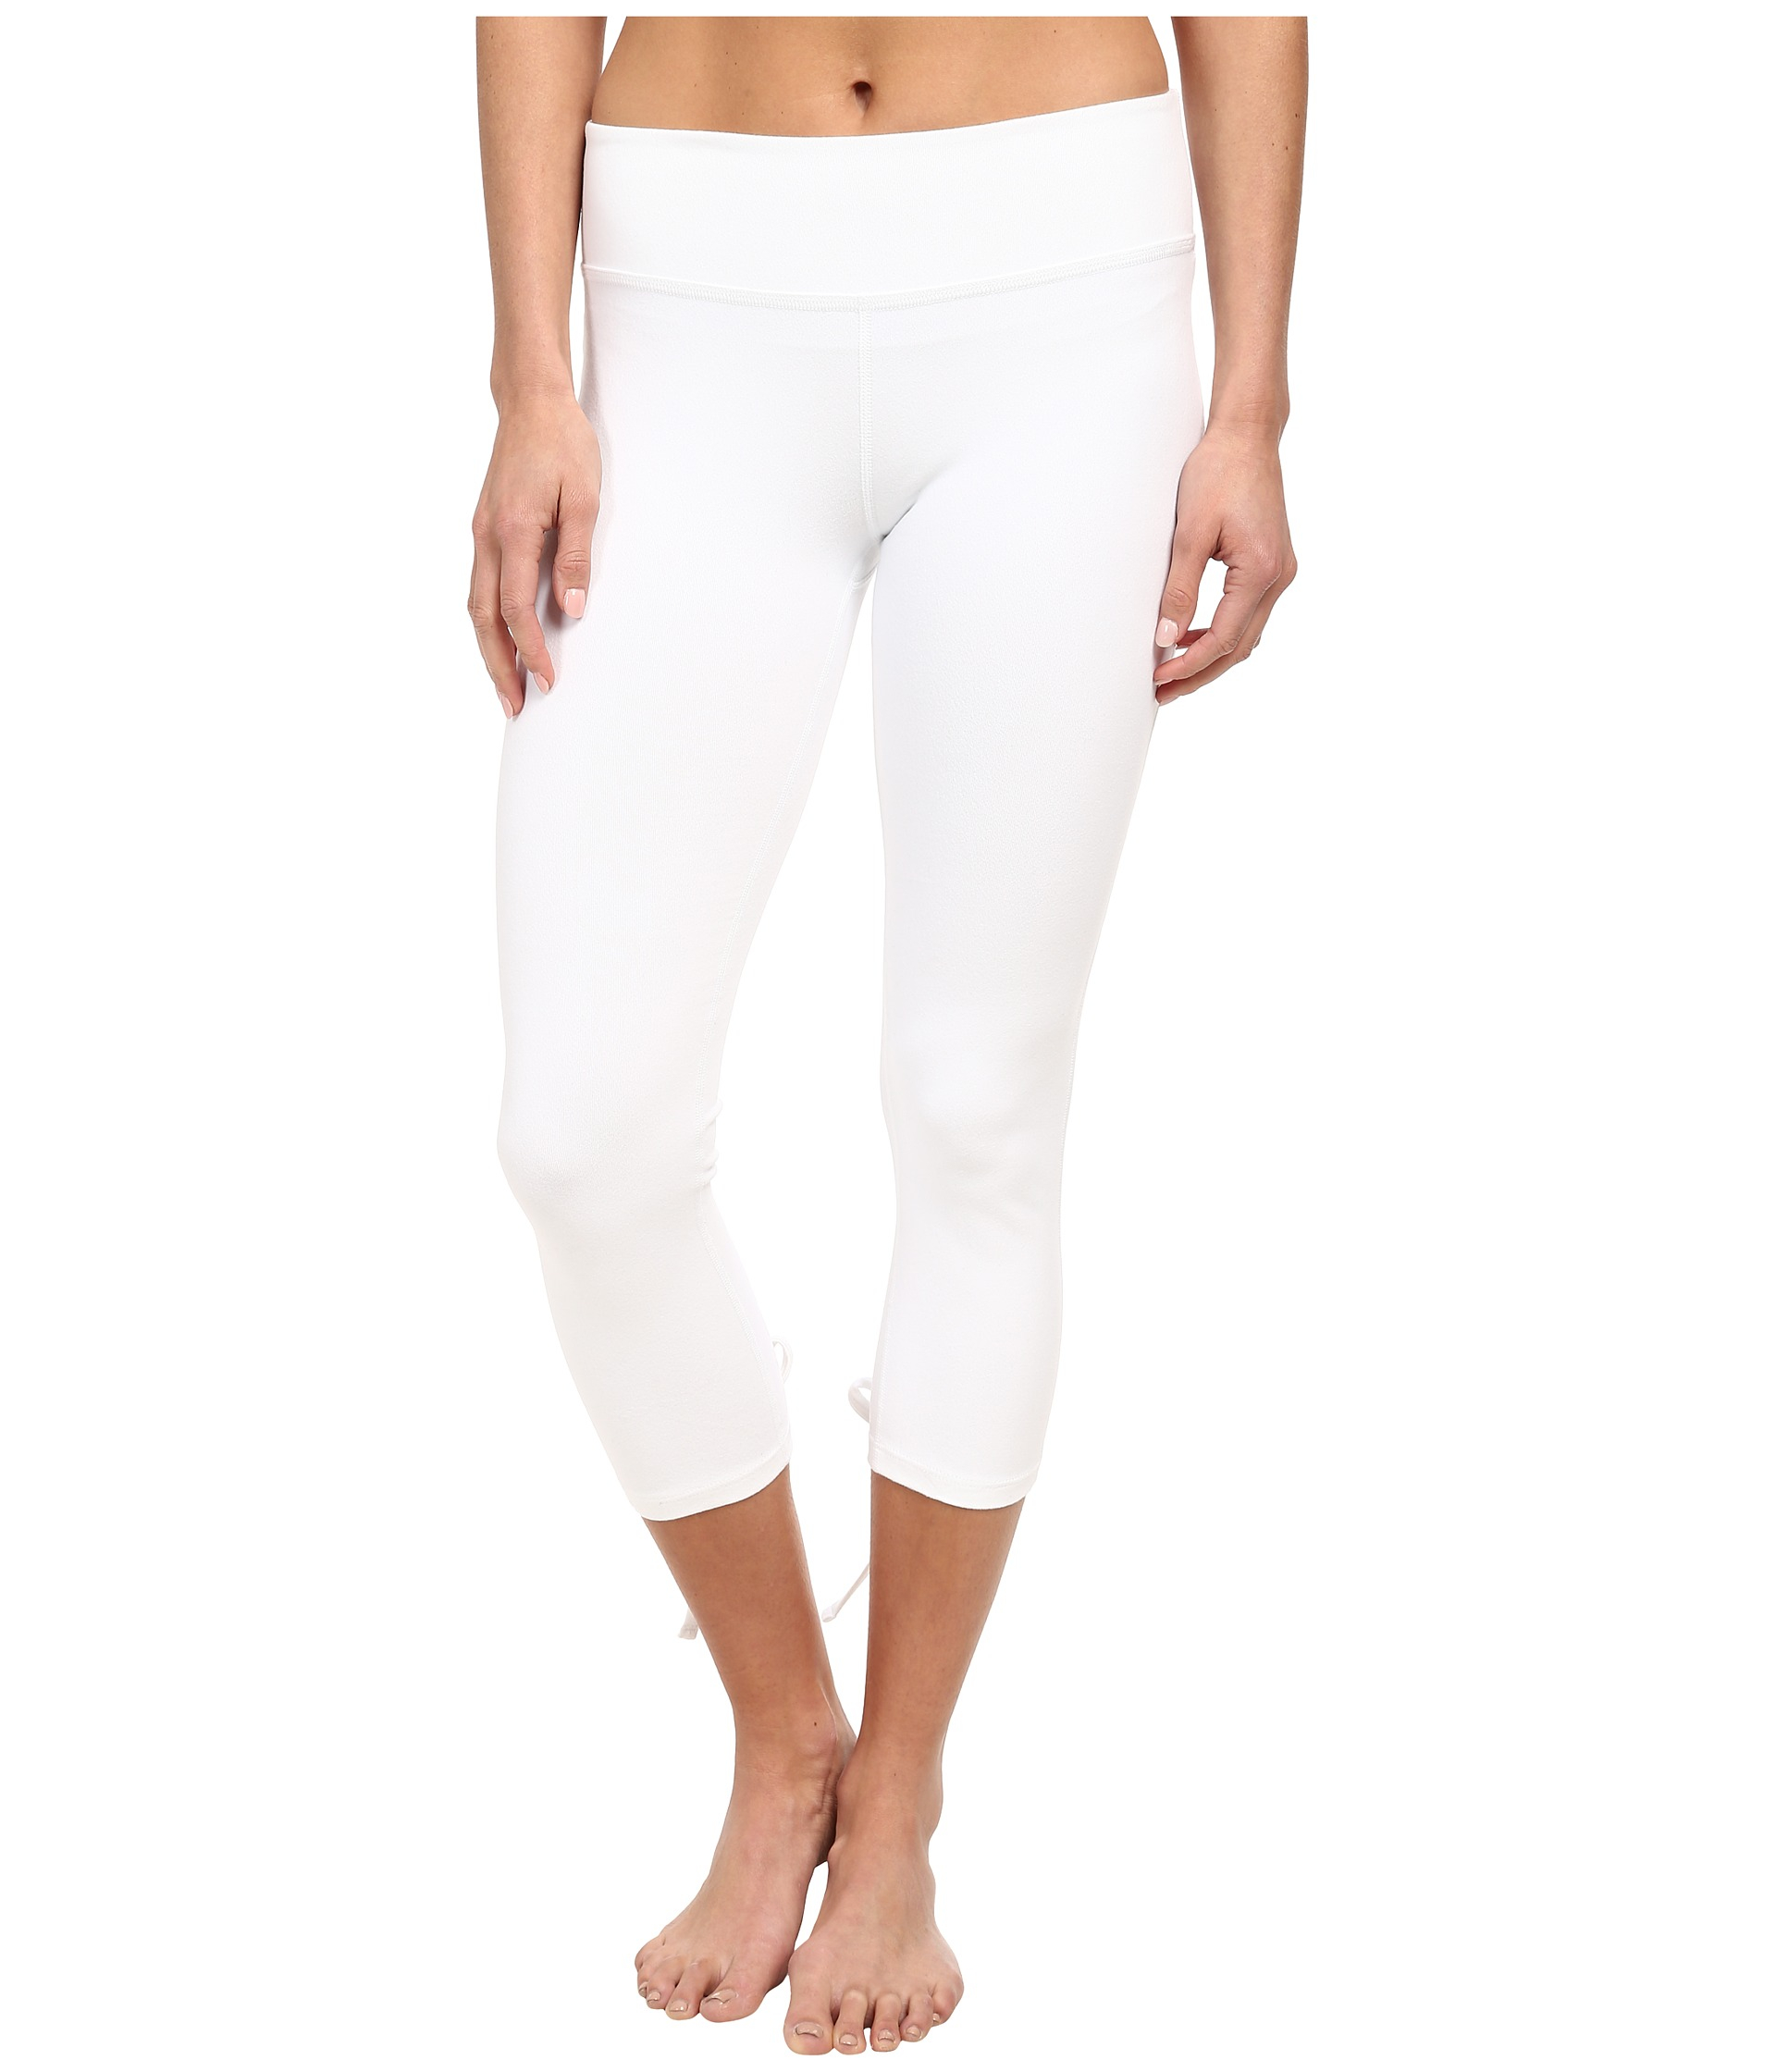 Lyst - Beyond Yoga Lace-up Legging in White